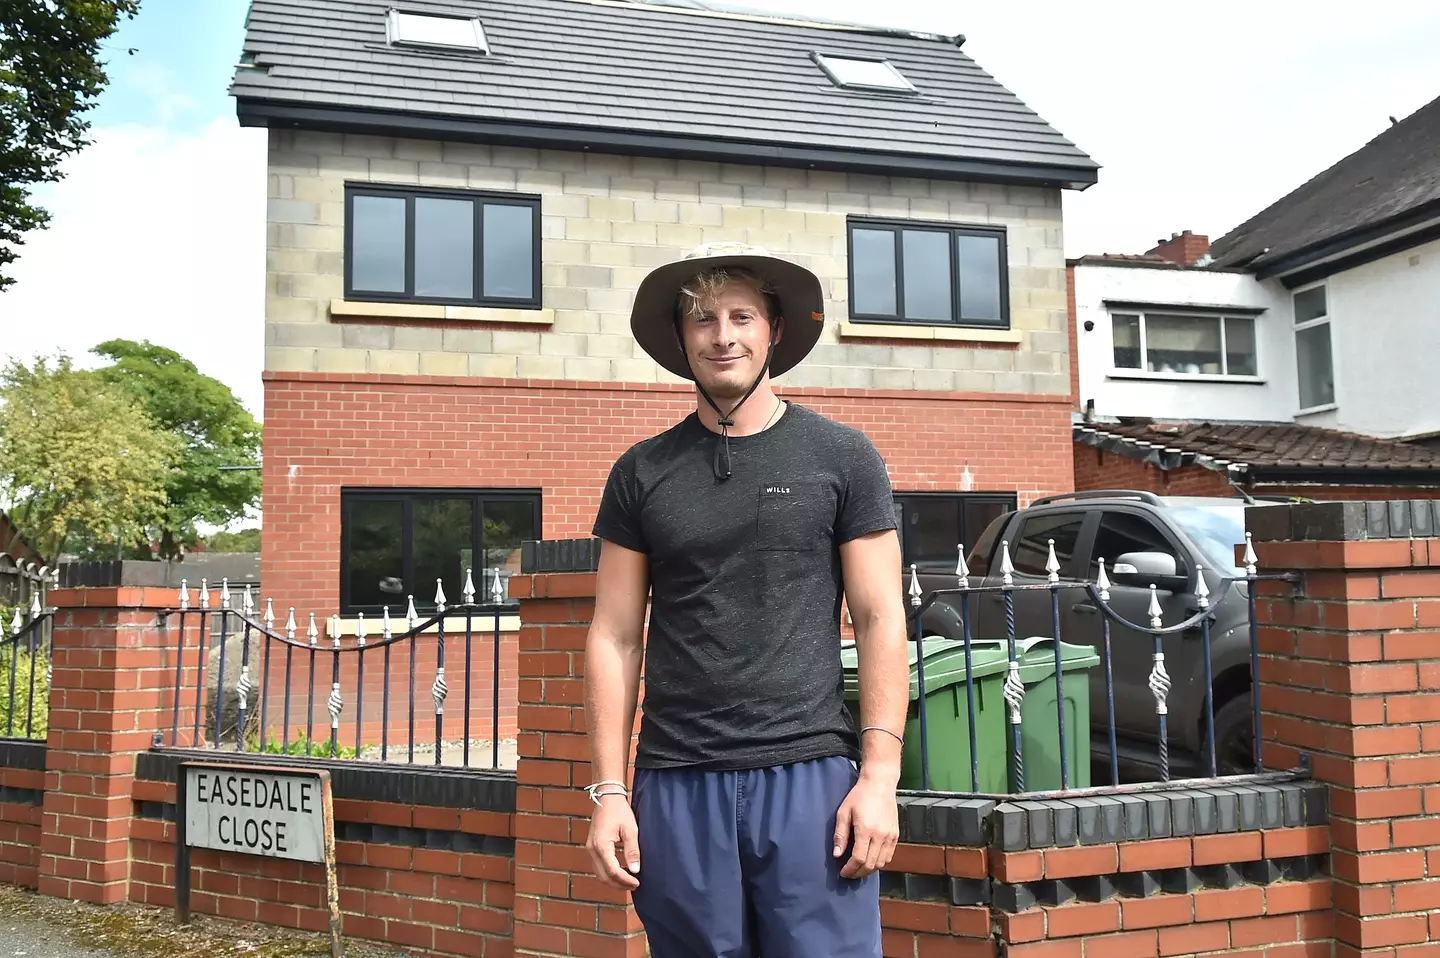 Alex Ward, 23, is one of the architects who's helped with the project.